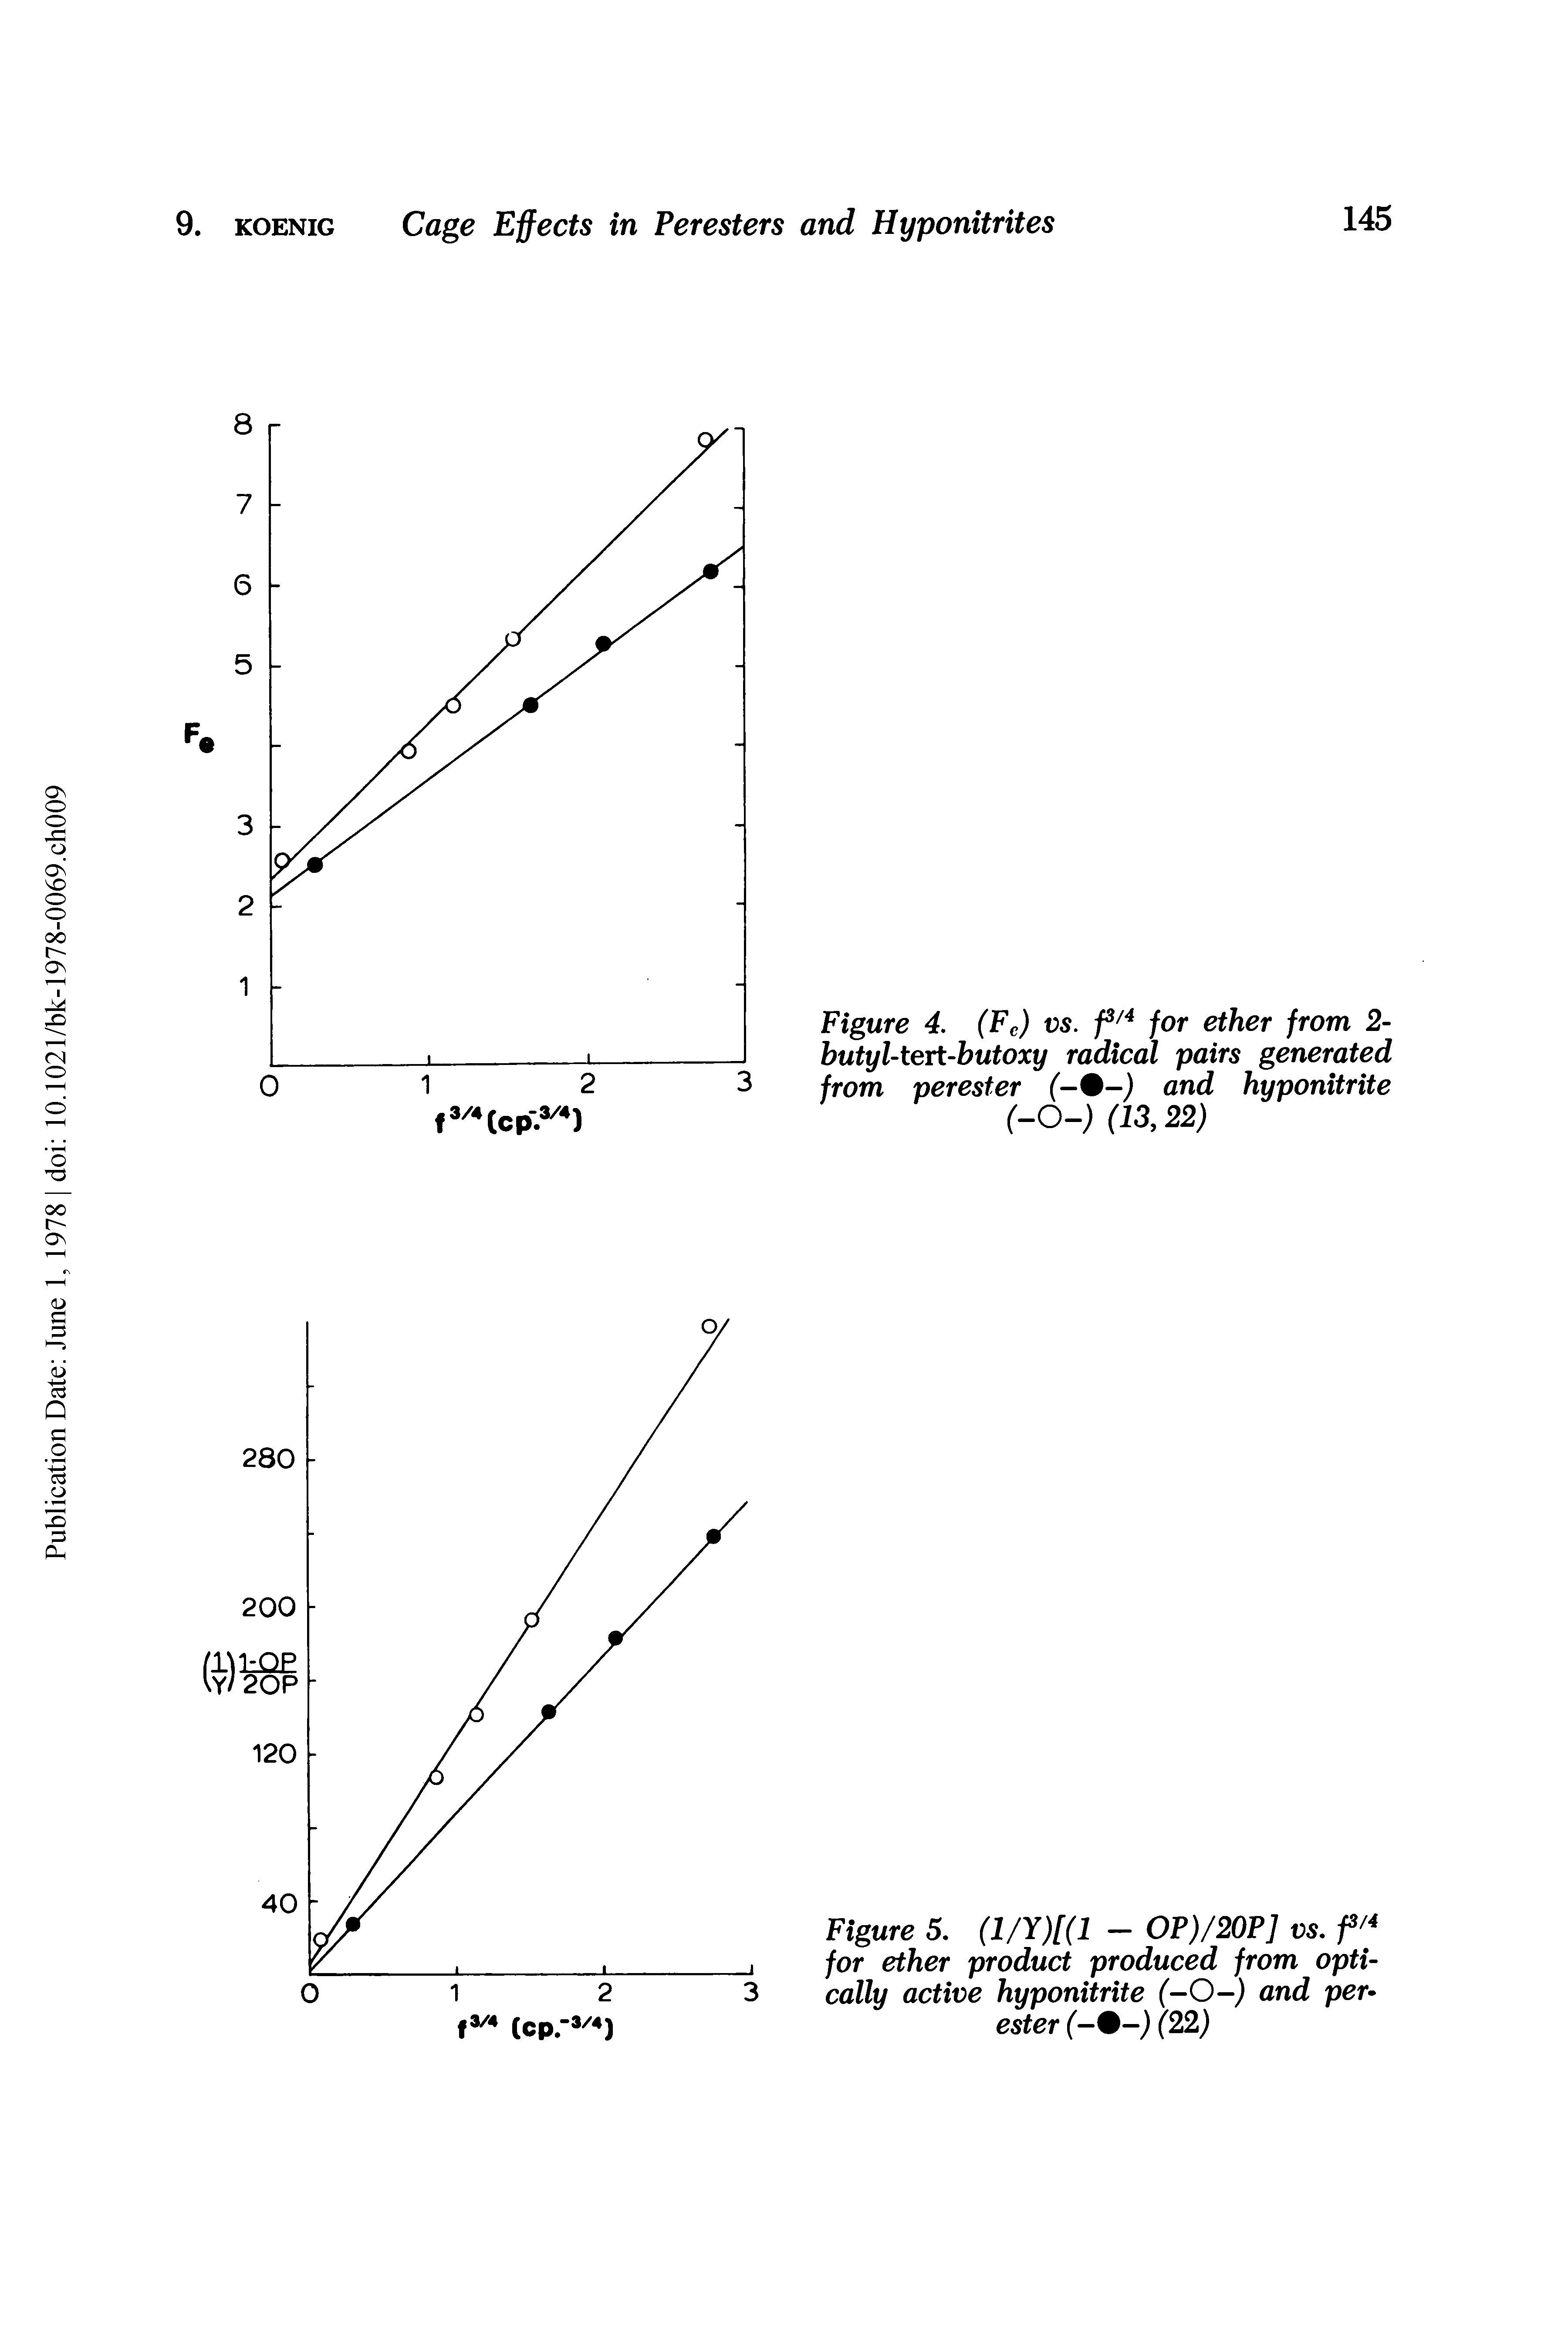 Figure 4, (Fe) vs. for ether from 2-butyl-tert-butoxy radical pairs generated from per ester (-%-) and hyponitrite (-0-) (13,22)...